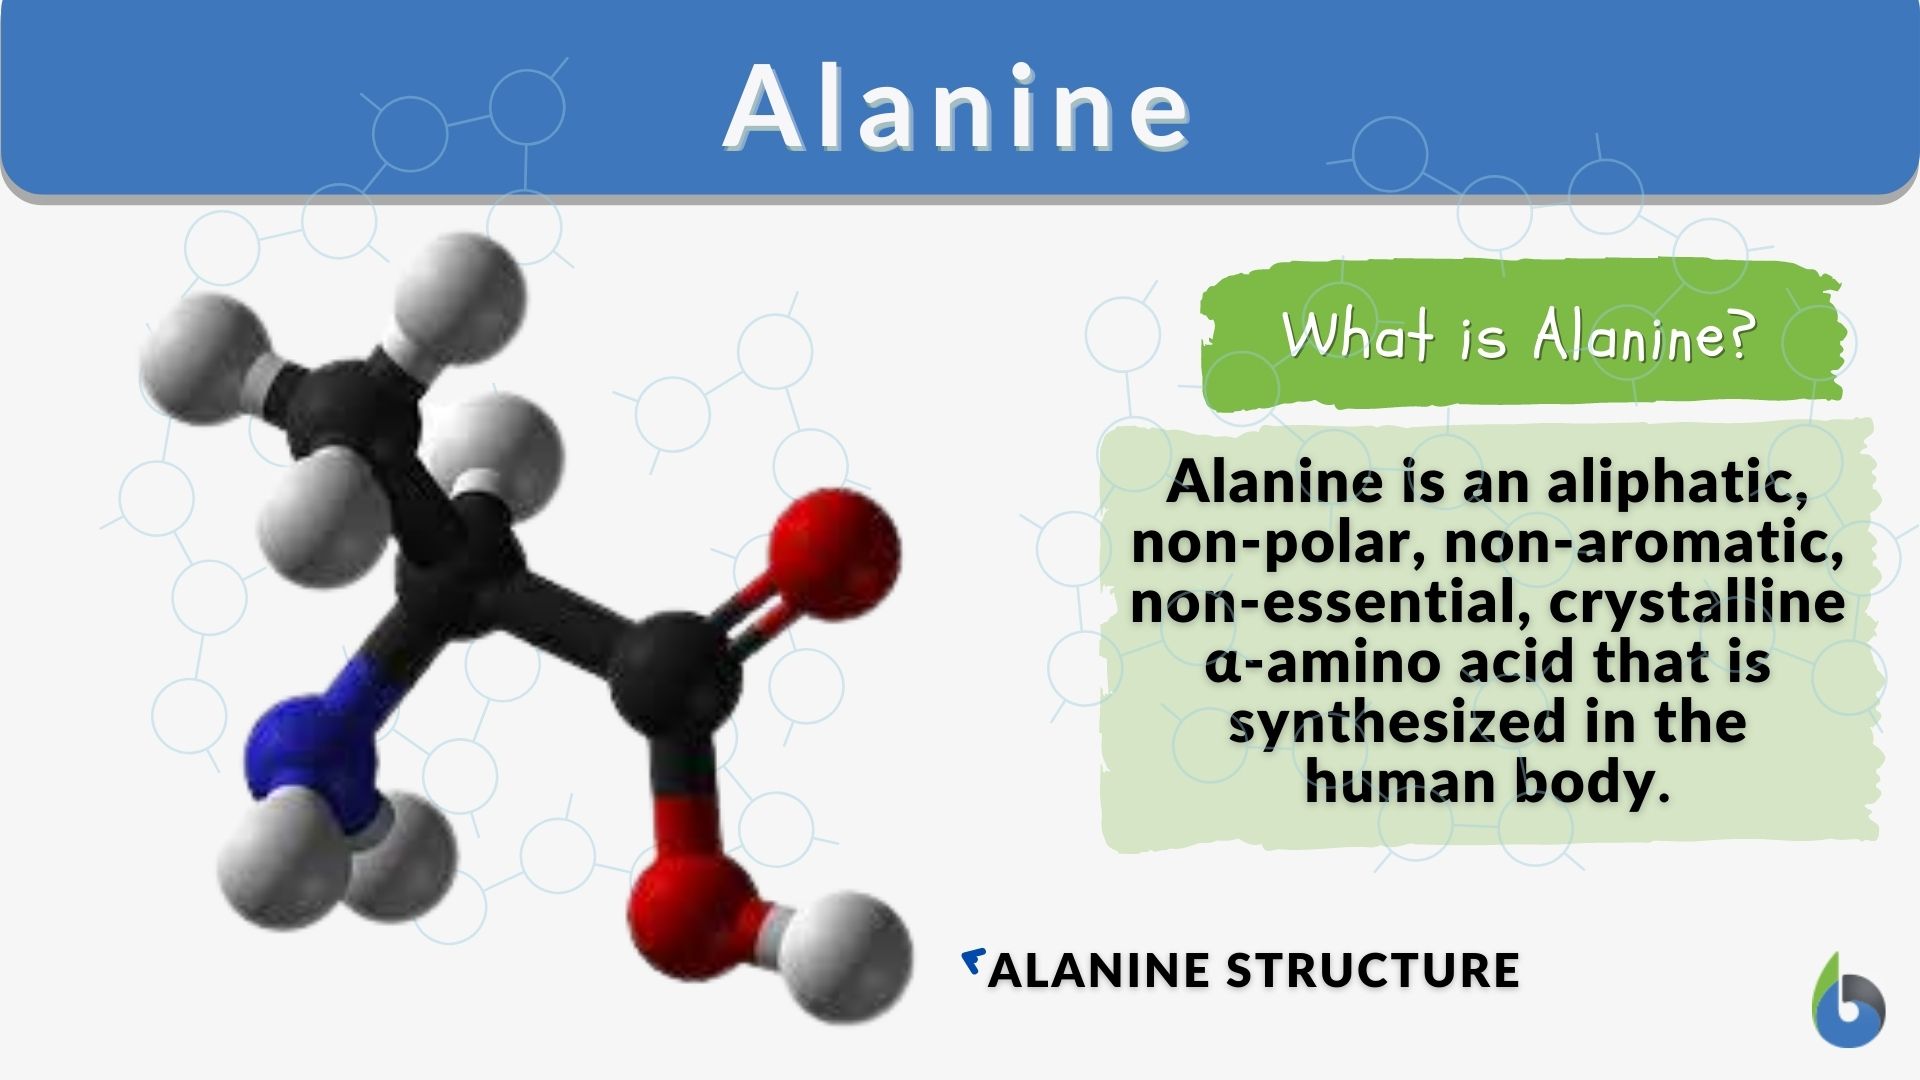 Glycine - Structure, Properties, Uses & Benefits with Images and FAQs